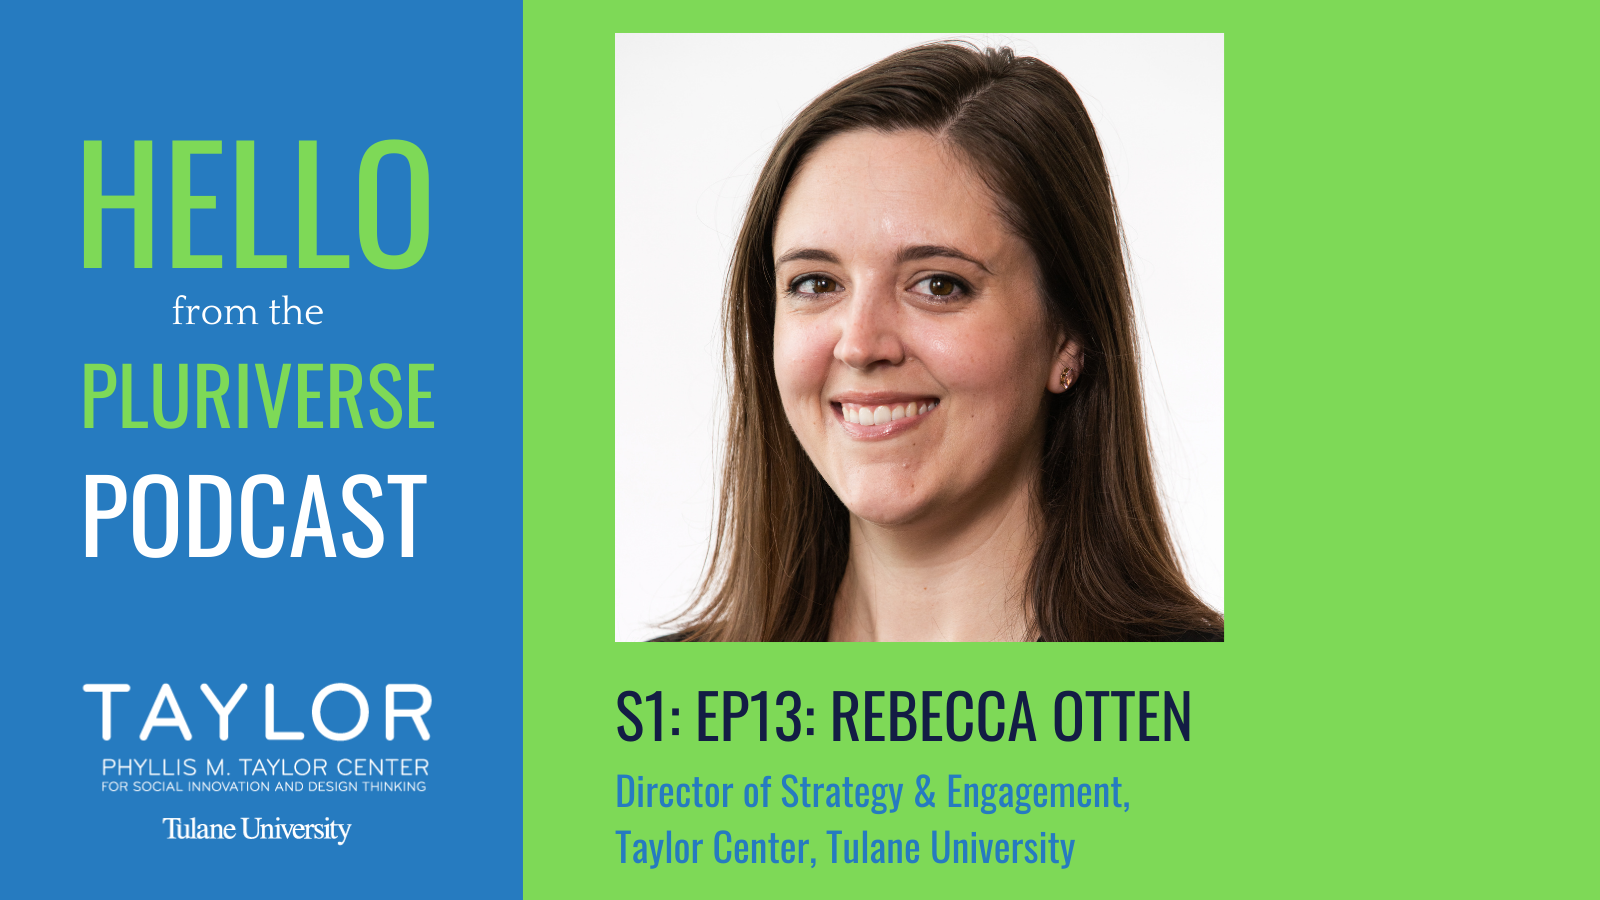 S1: Ep13: Hello from the Pluriverse: Rebecca Otten The Phyllis M. Taylor Center for Social Innovation and Design Thinking